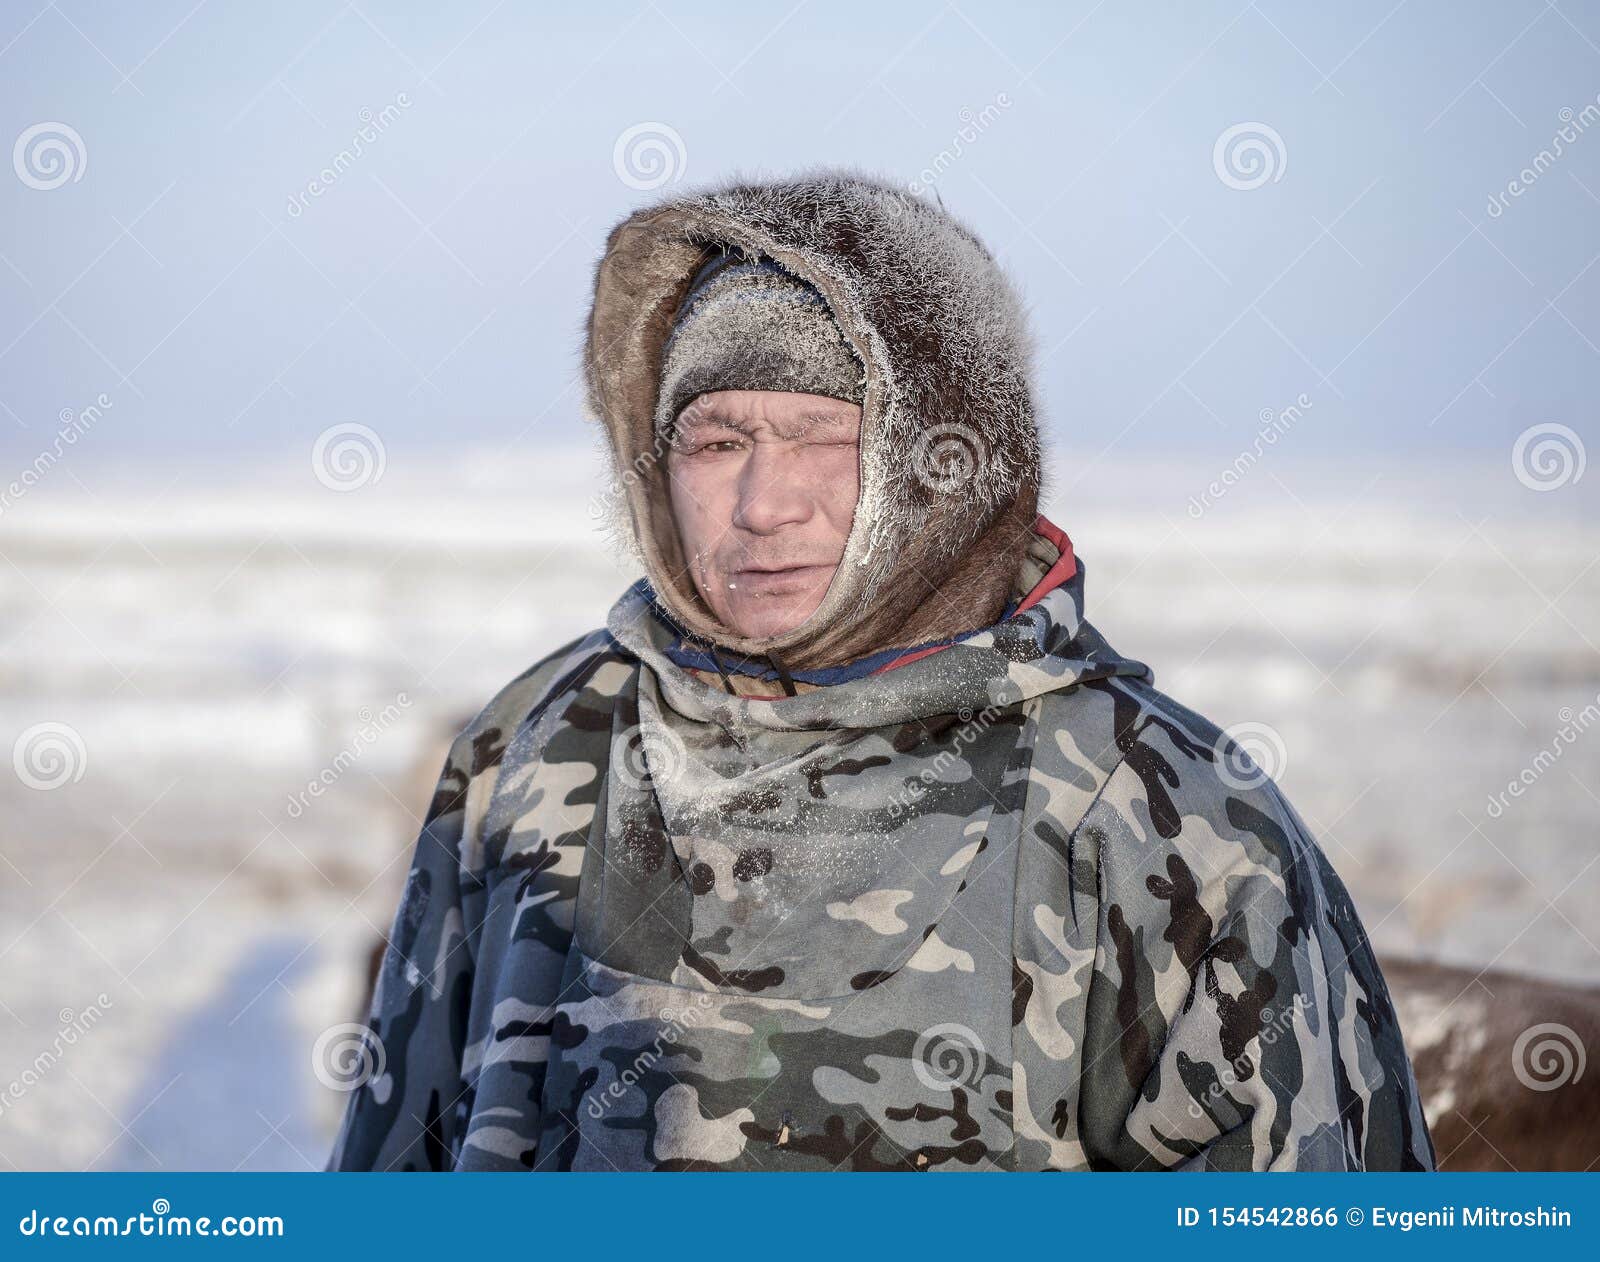 local resident of the tundra, reindeer herder